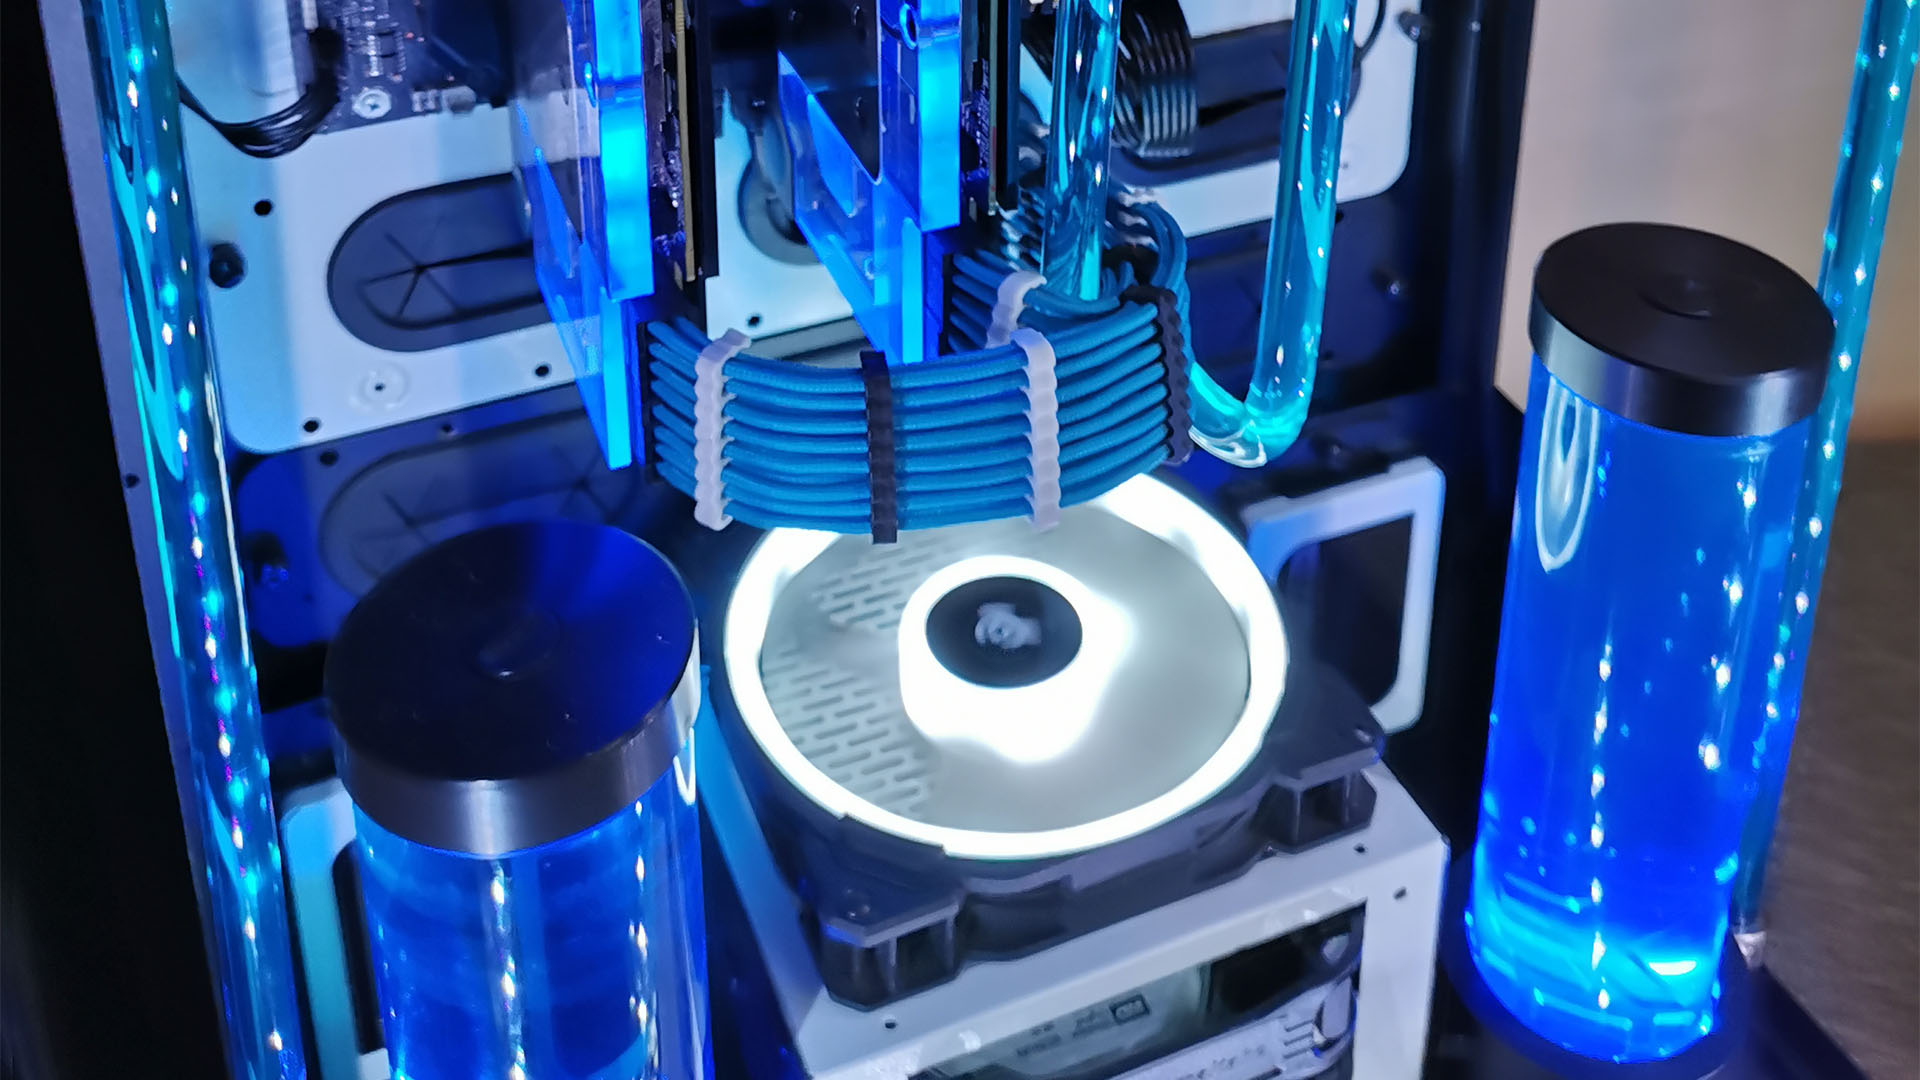 The watercooled gaming PC inside a blue Thermaltake Tower 900 case